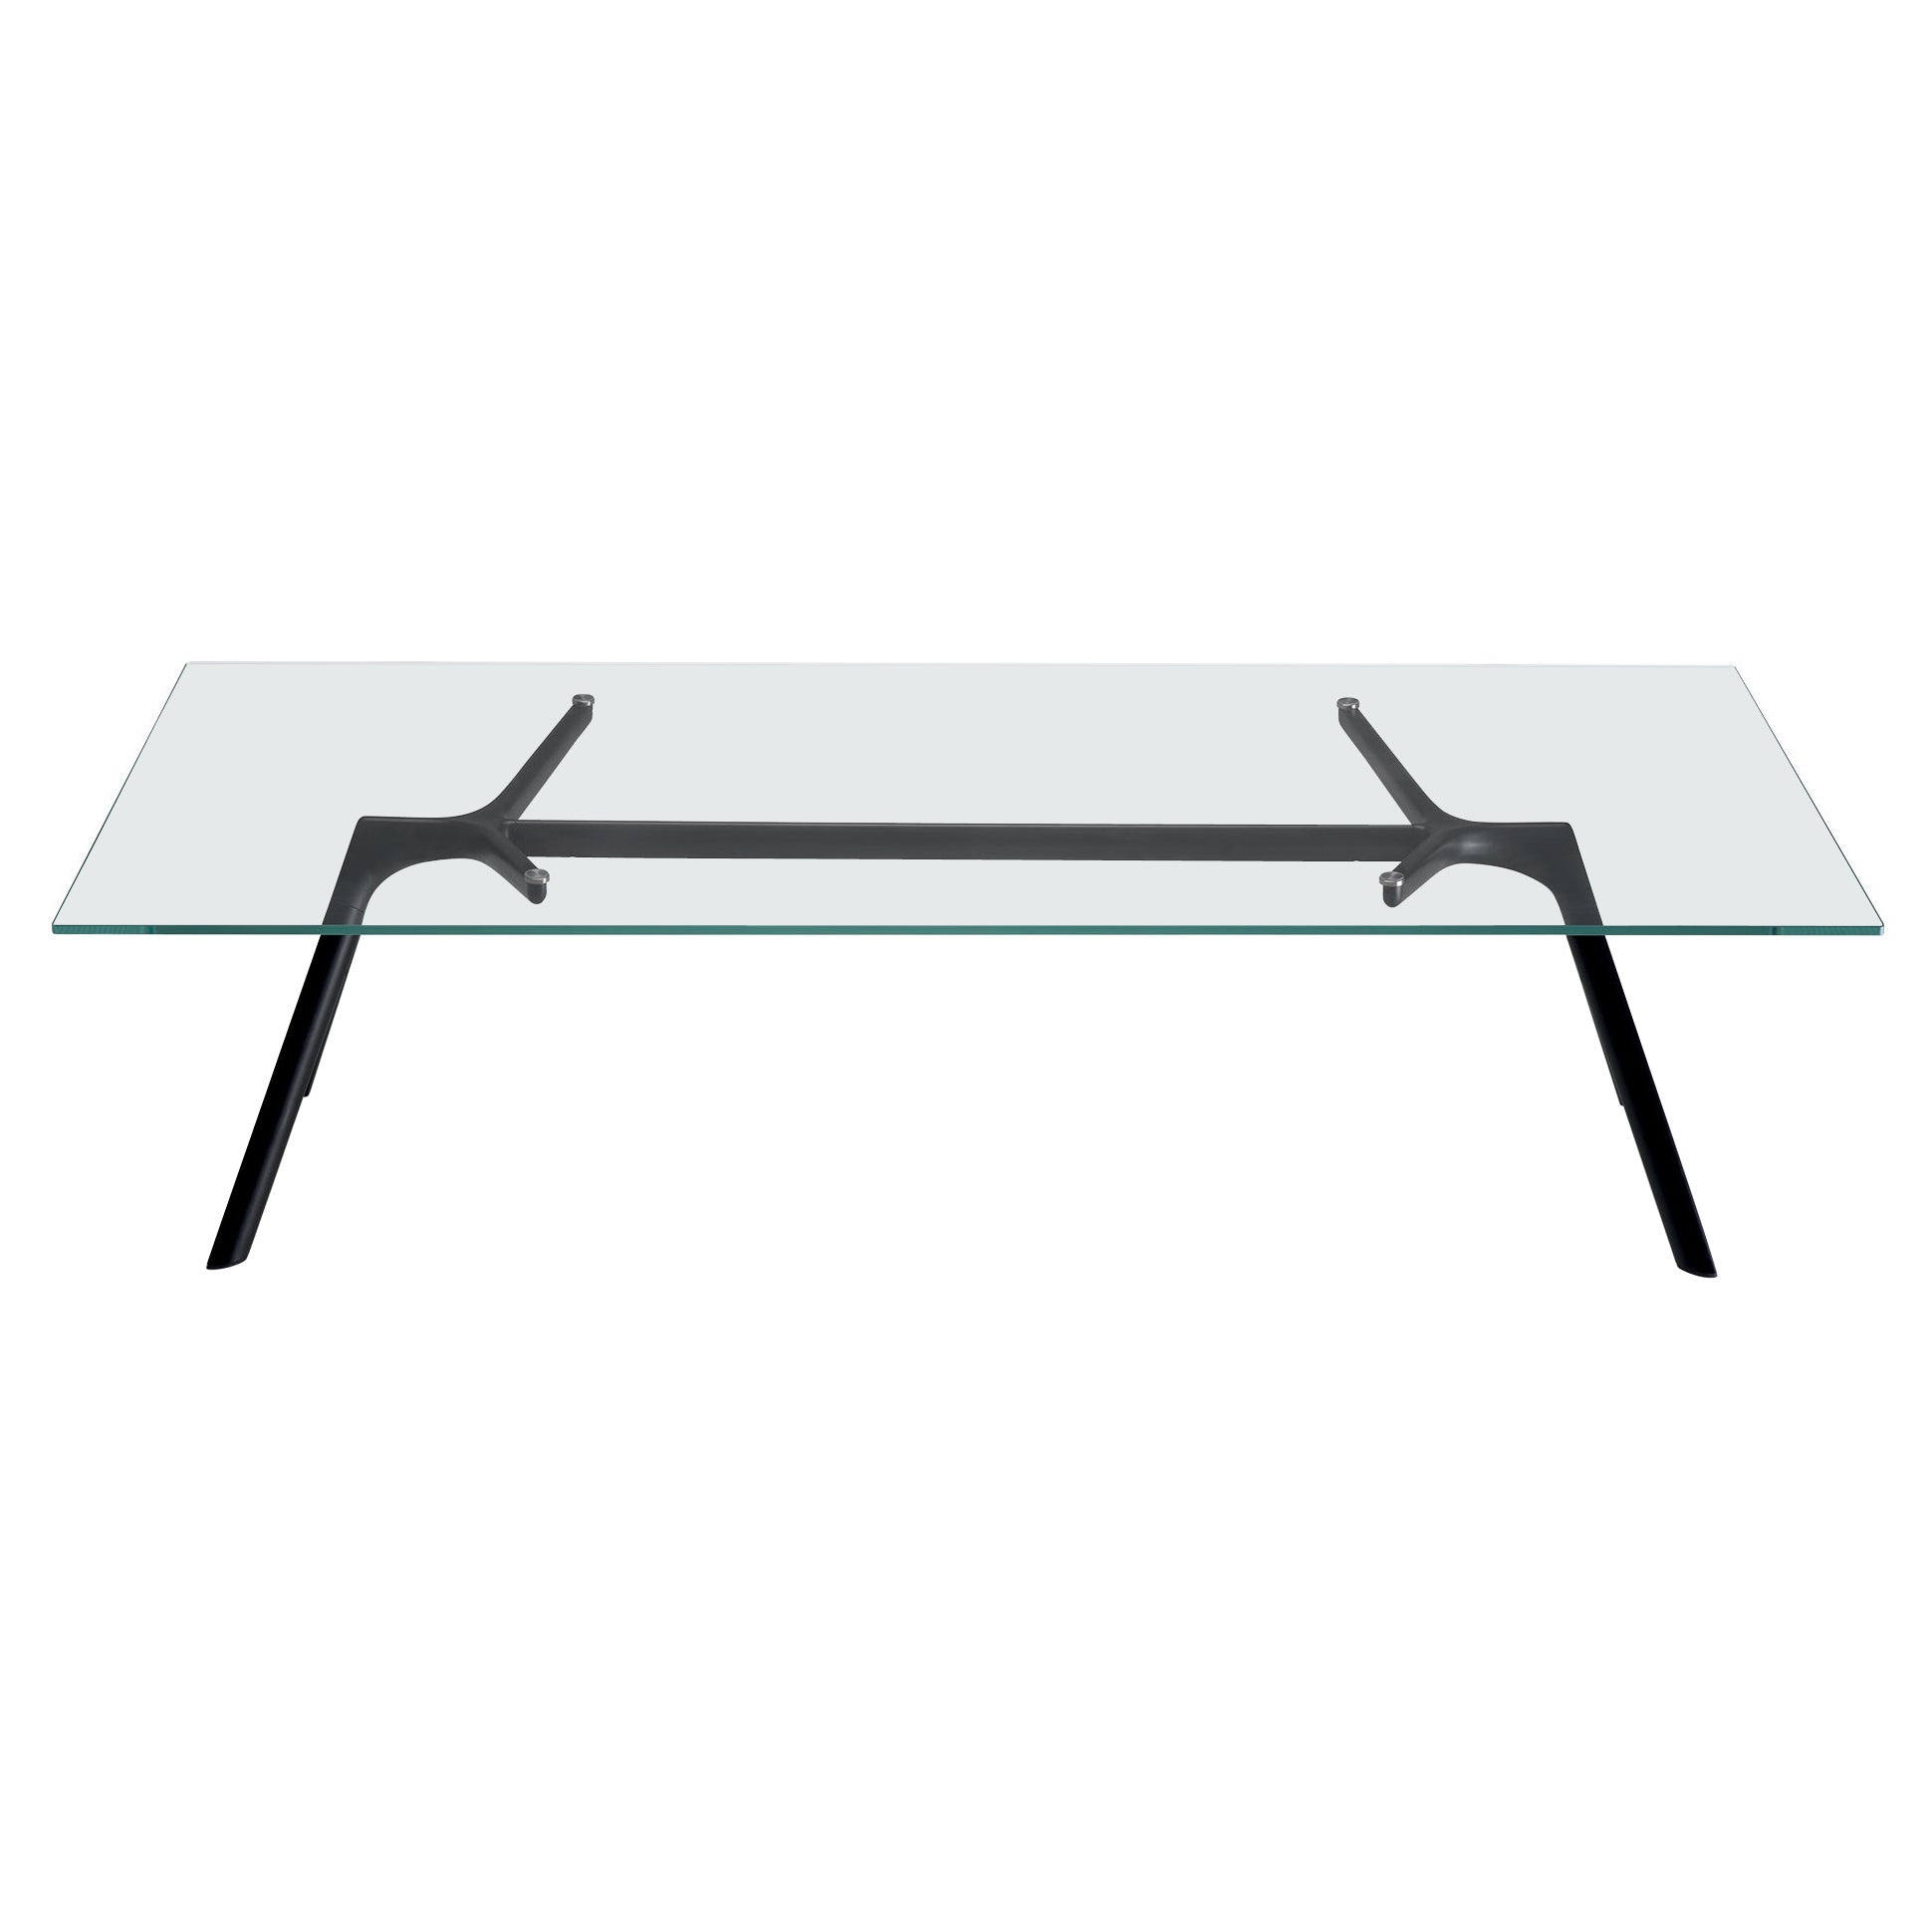 Alias Medium Dry XS 45B Table in Glass Top with Black Lacquered Aluminium Frame